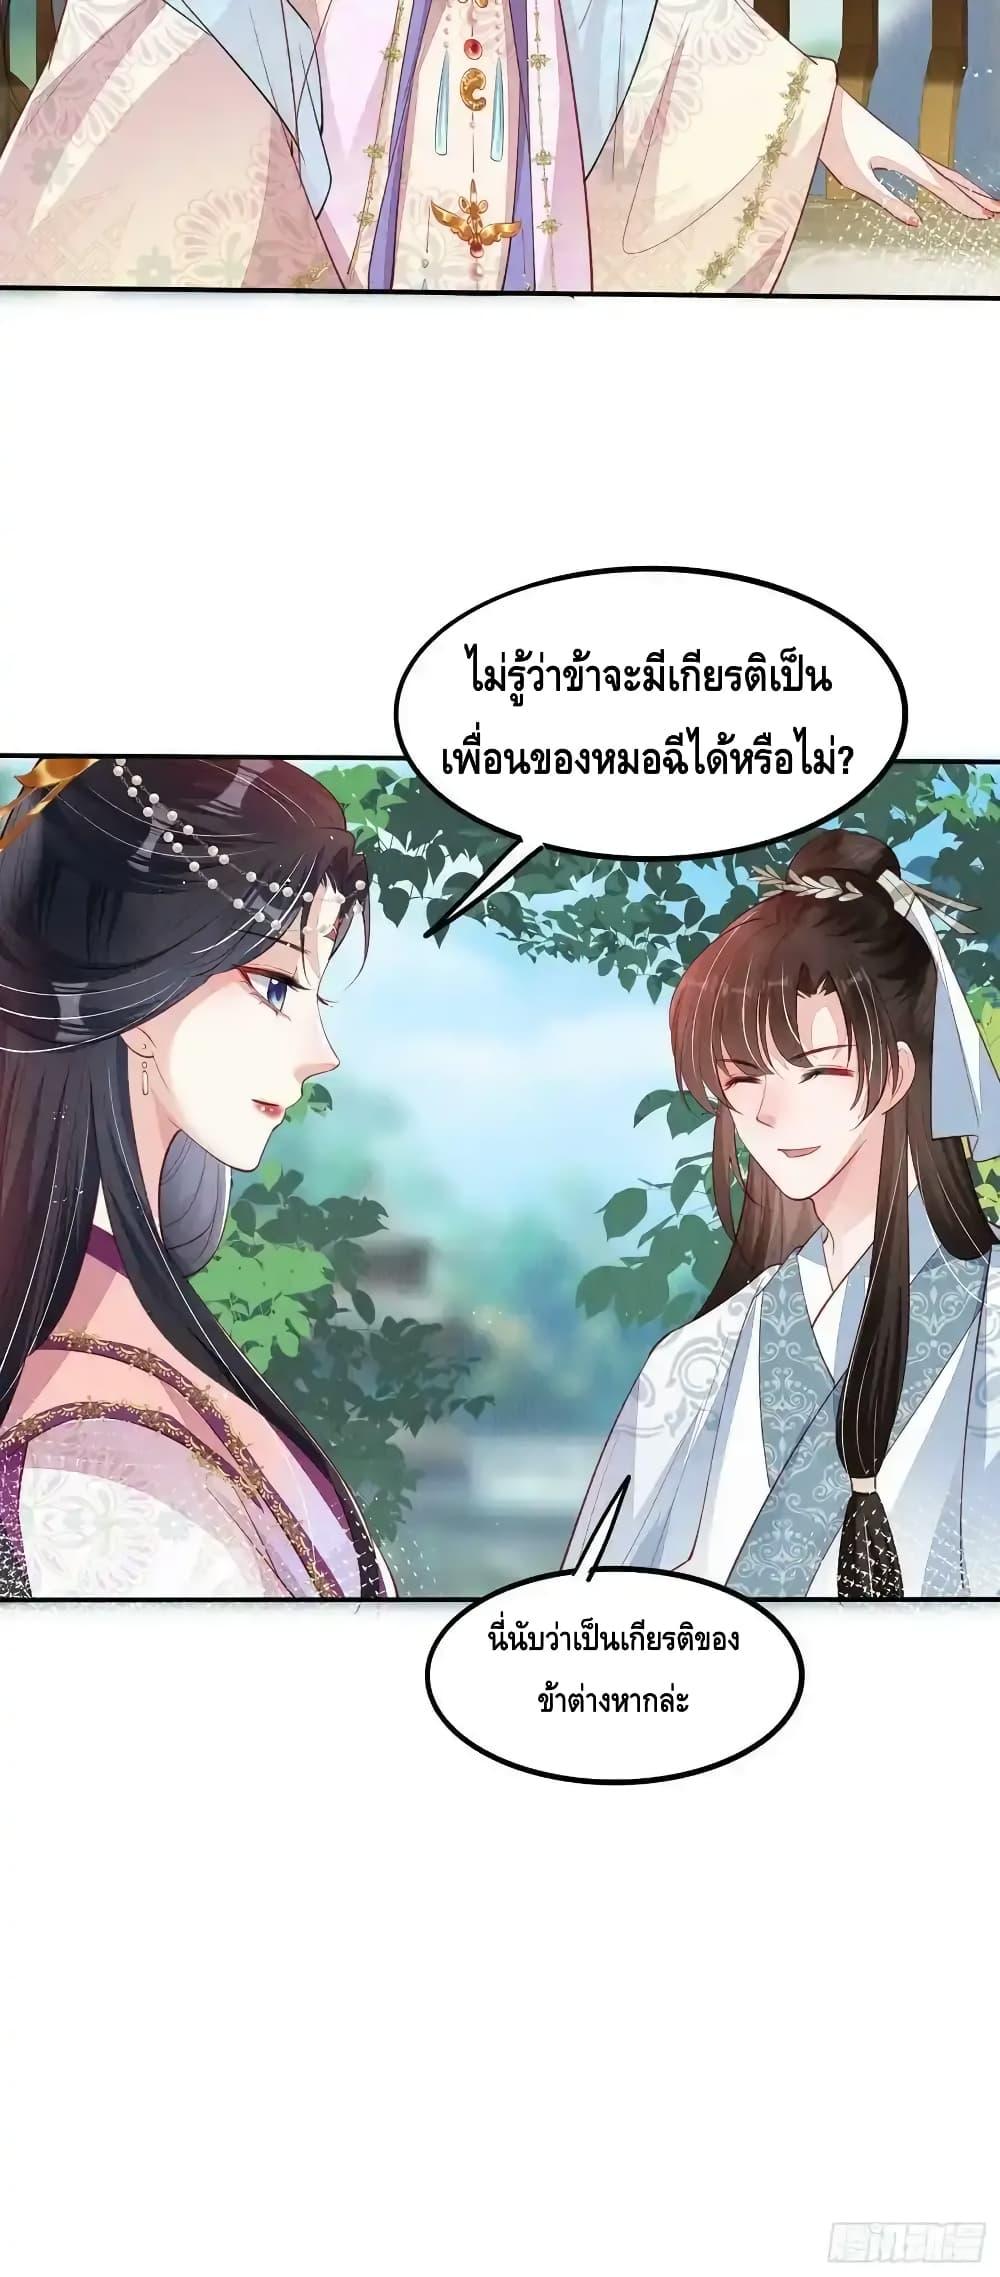 After I Bloom, a Hundred Flowers Will ill – ดอกไม้นับ ตอนที่ 70 (22)